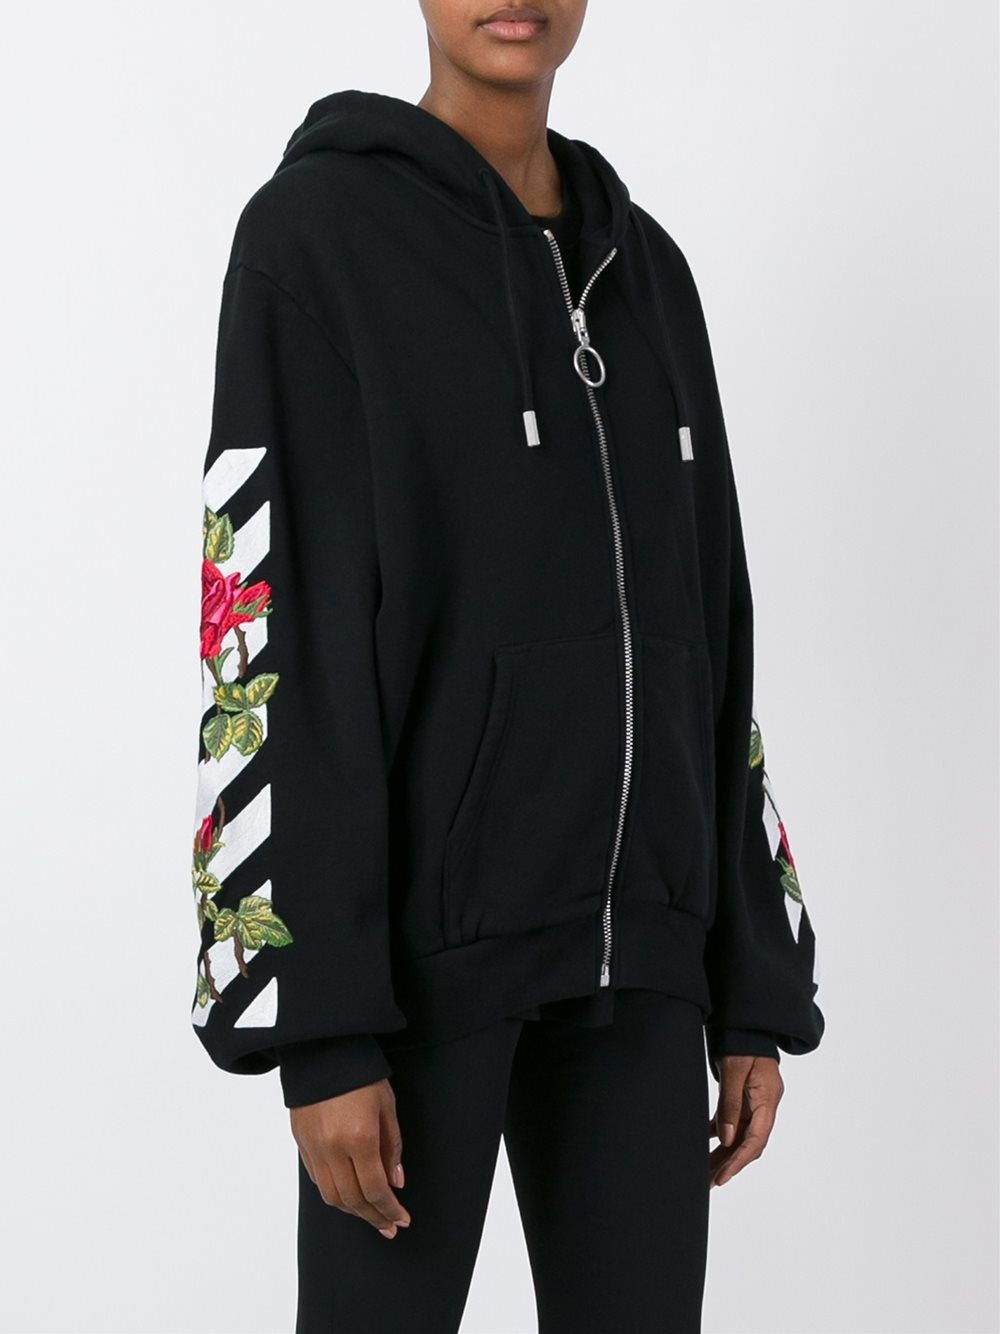 Off White Hoodie Roses Deals, 55% OFF | osana.care